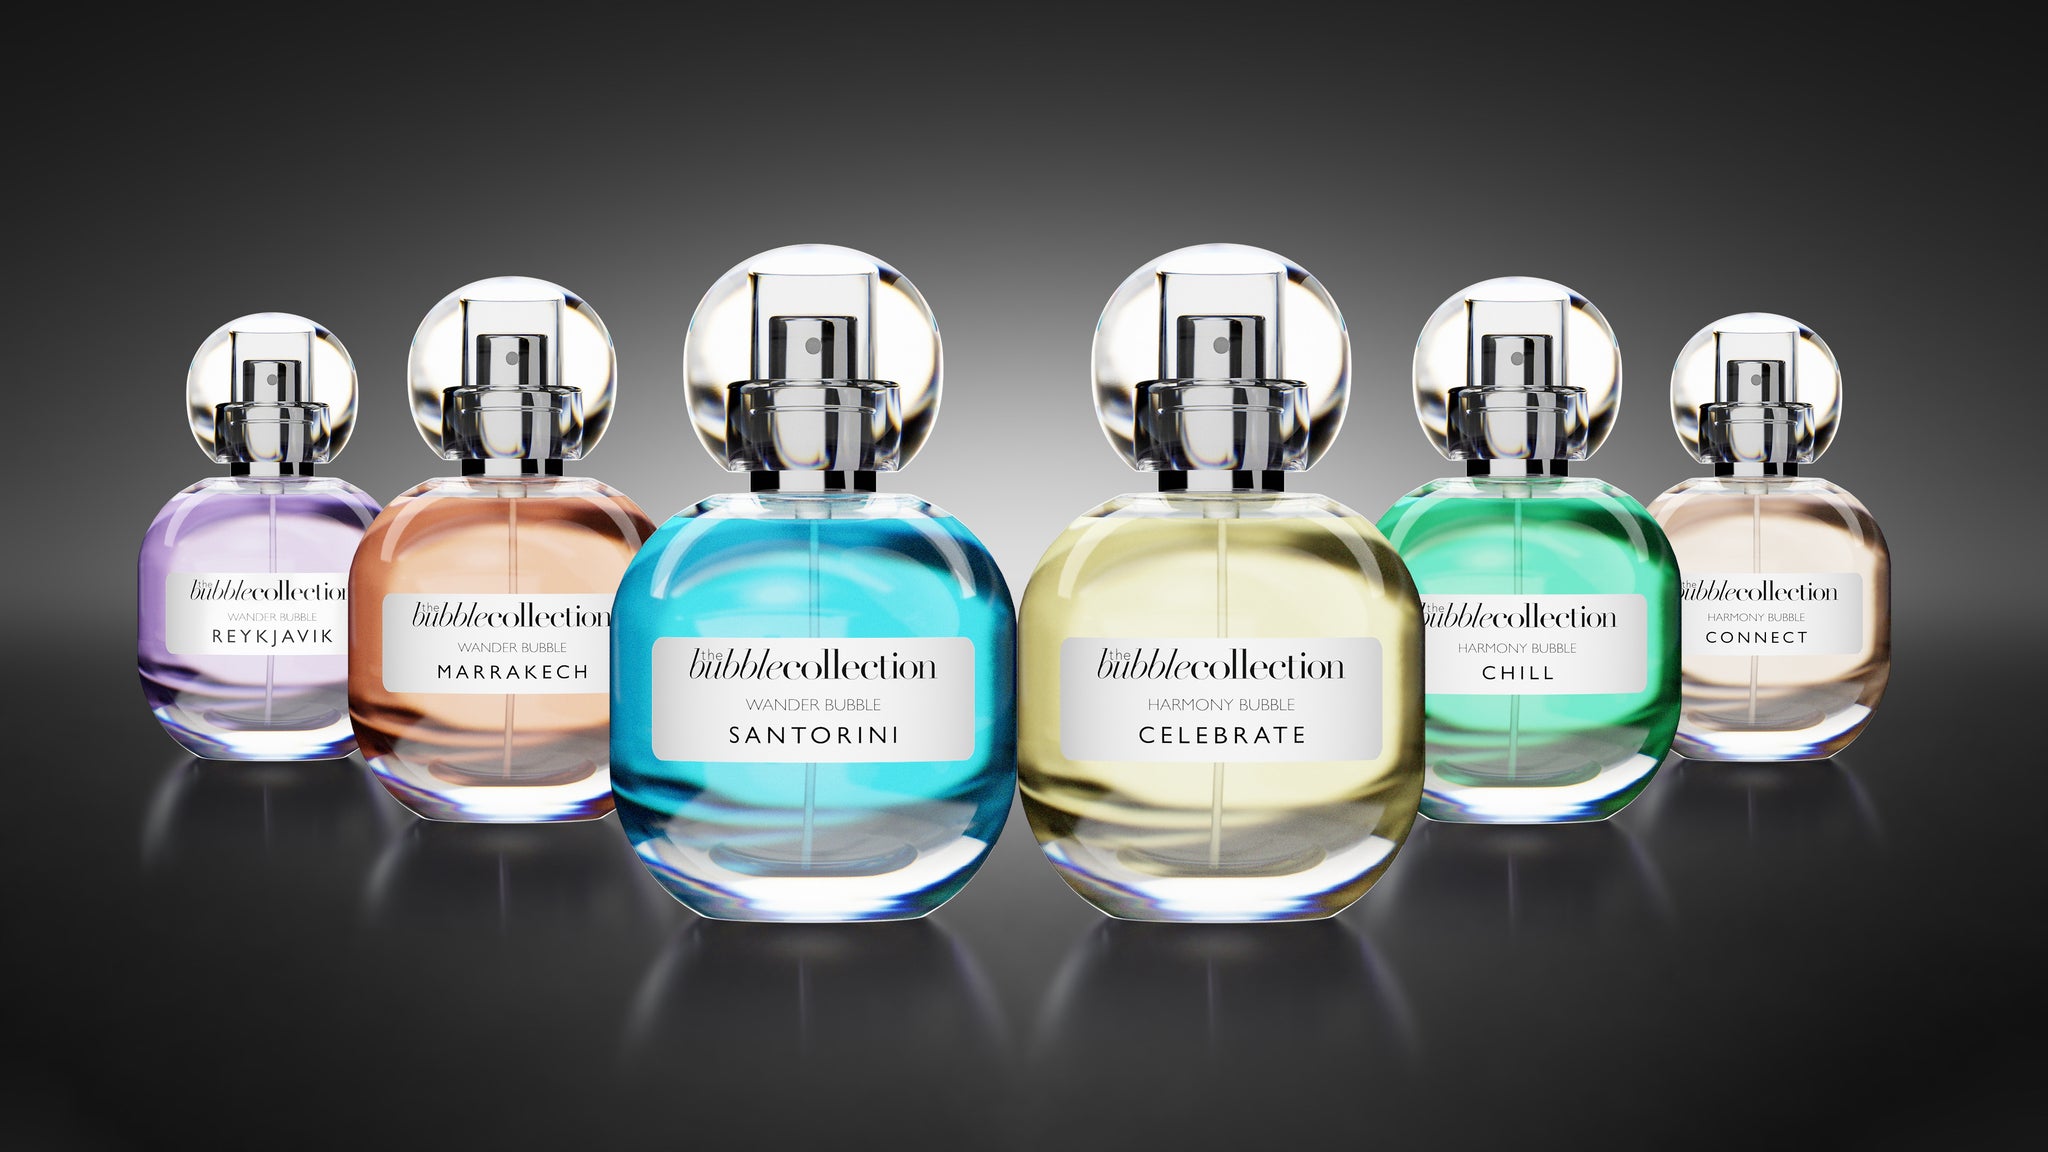 The Bubble Collection will rise up and take you on a fragrance journey around the world. Where you can wander and explore new places. Where harmony is a way of life, connecting you to others globally. Fine, niche, genderless fragrance for her, for him